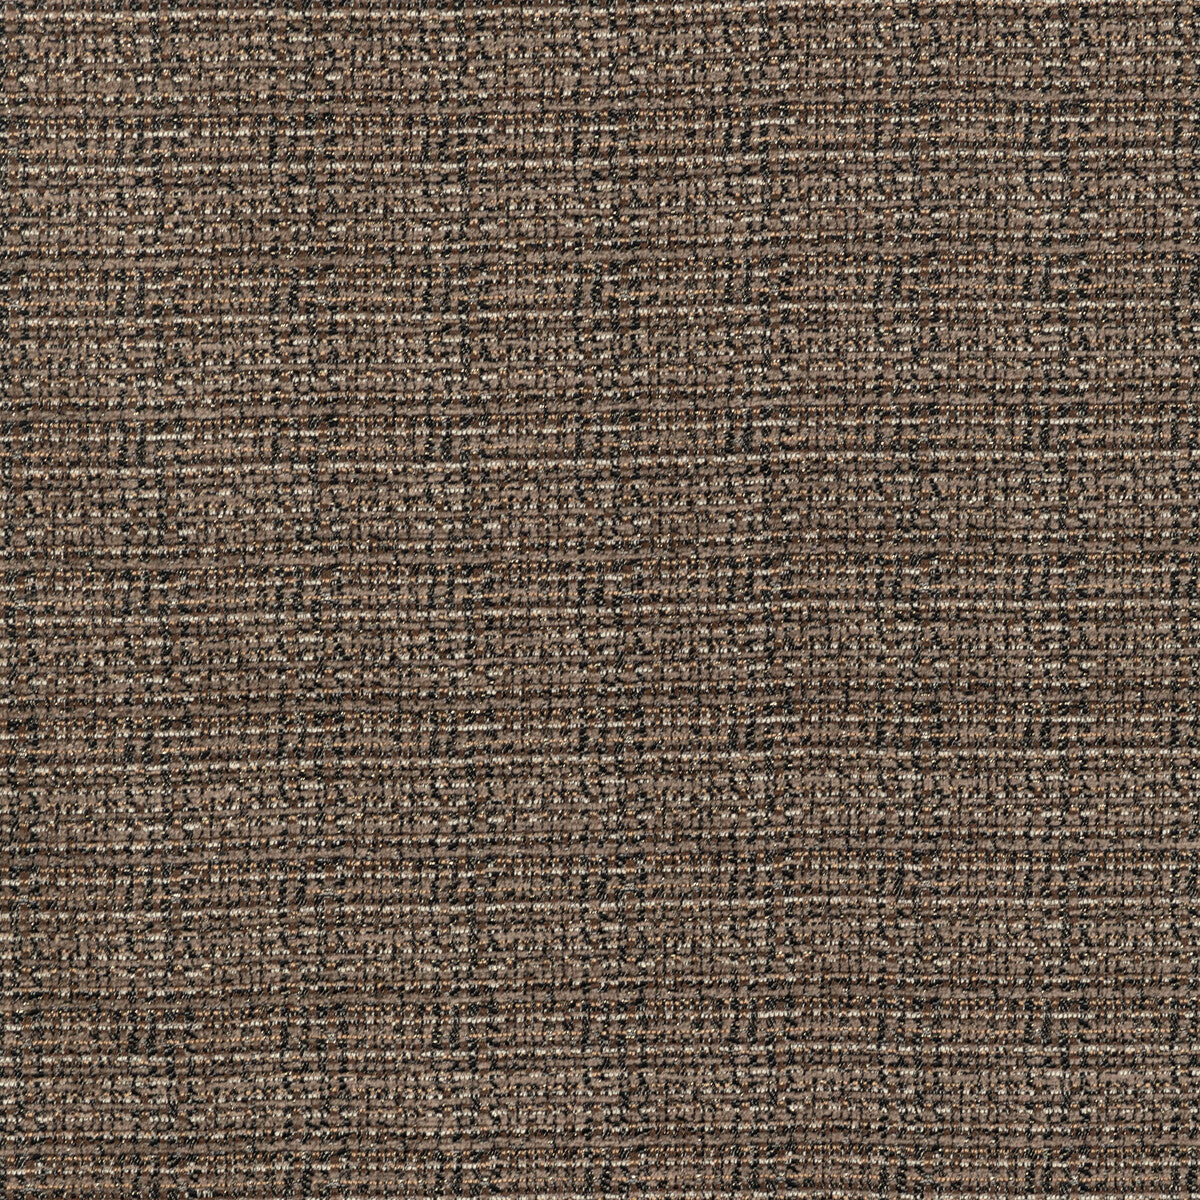 Ferla fabric in bronze color - pattern 36313.86.0 - by Kravet Contract